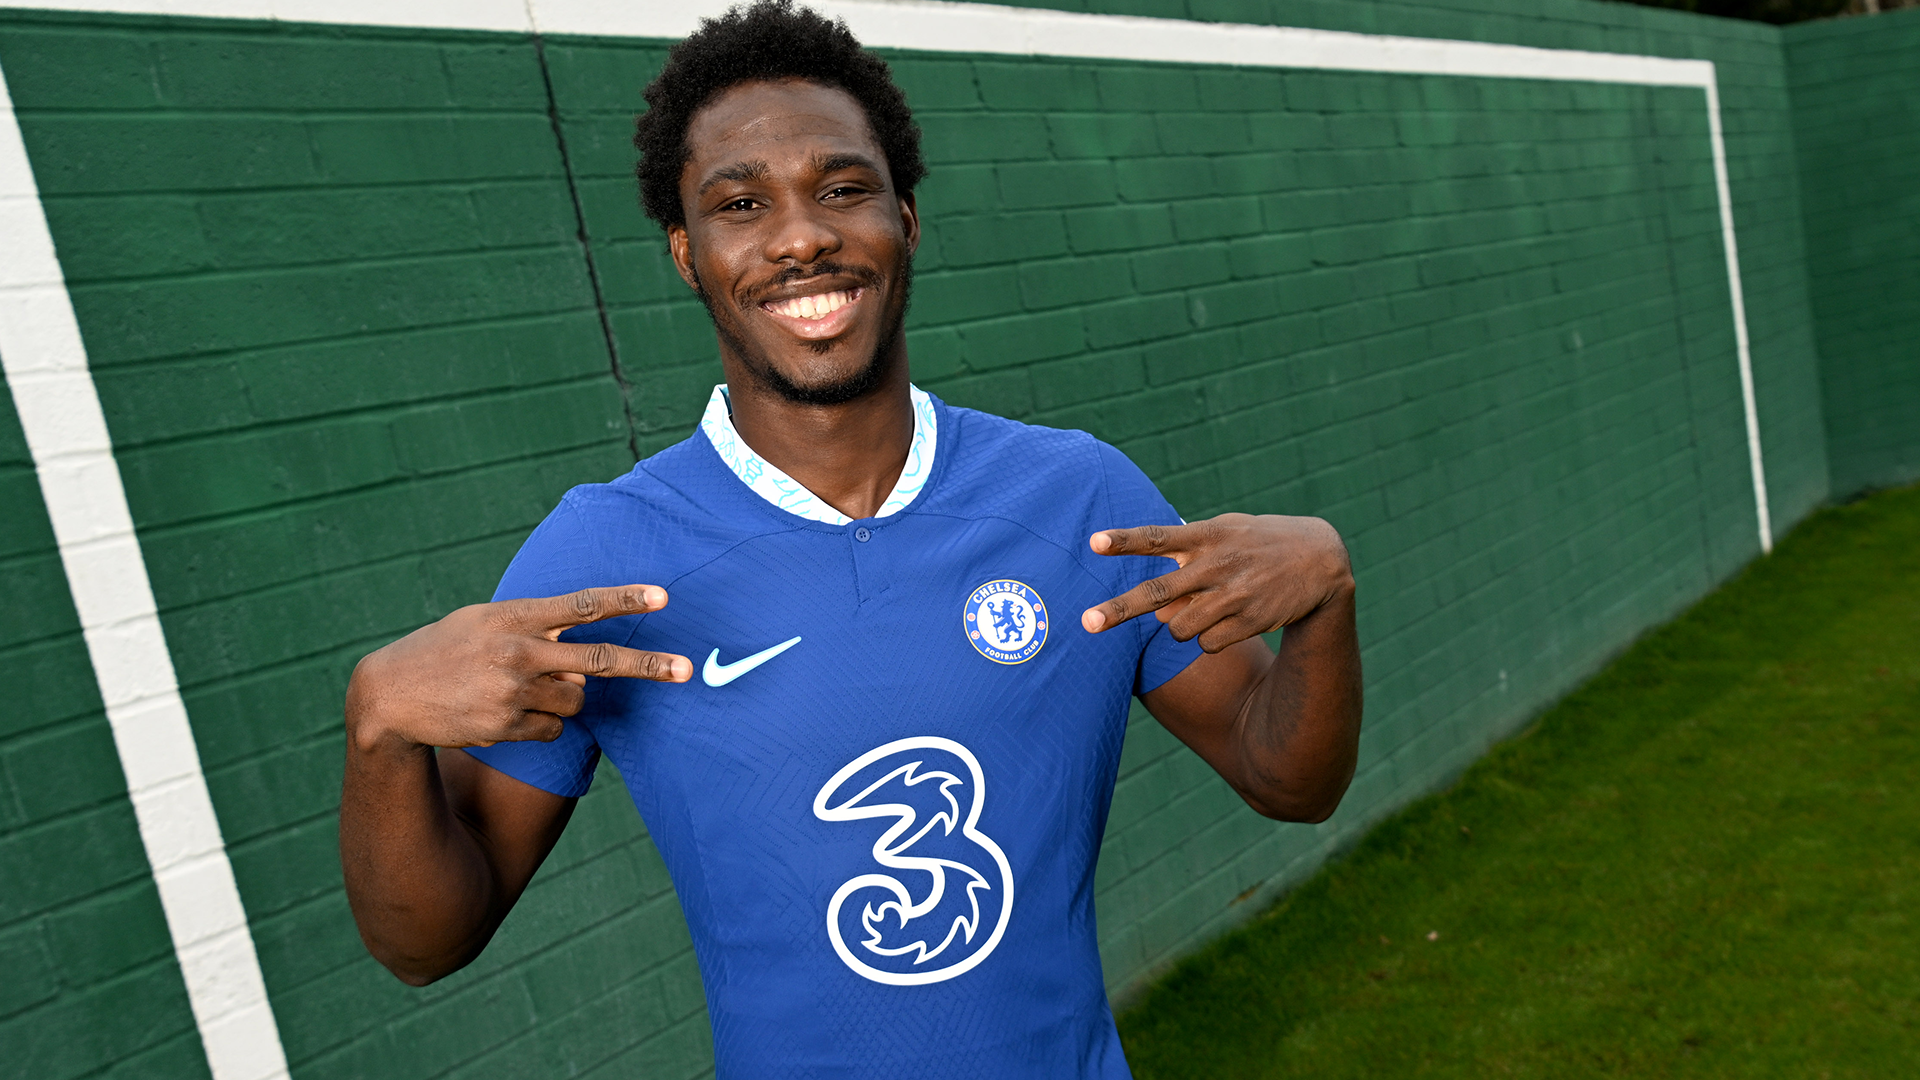 He's here! Chelsea release photos from David Datro Fofana's introductory  shoot | Goal.com UK